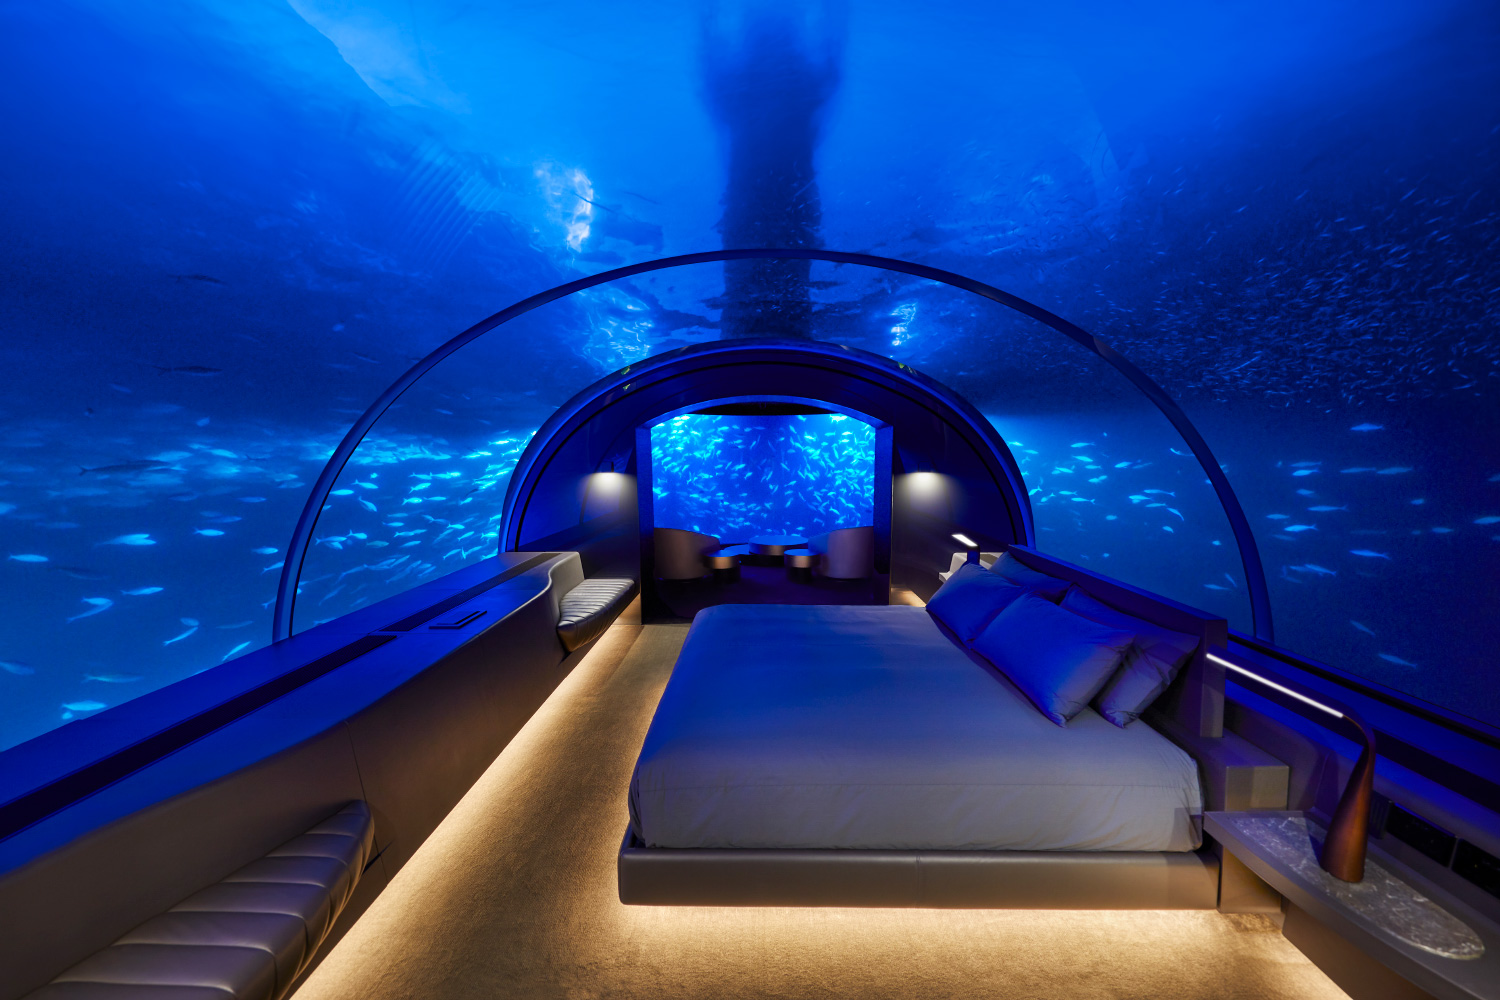 Take a deep dive into the world's first underwater hotel